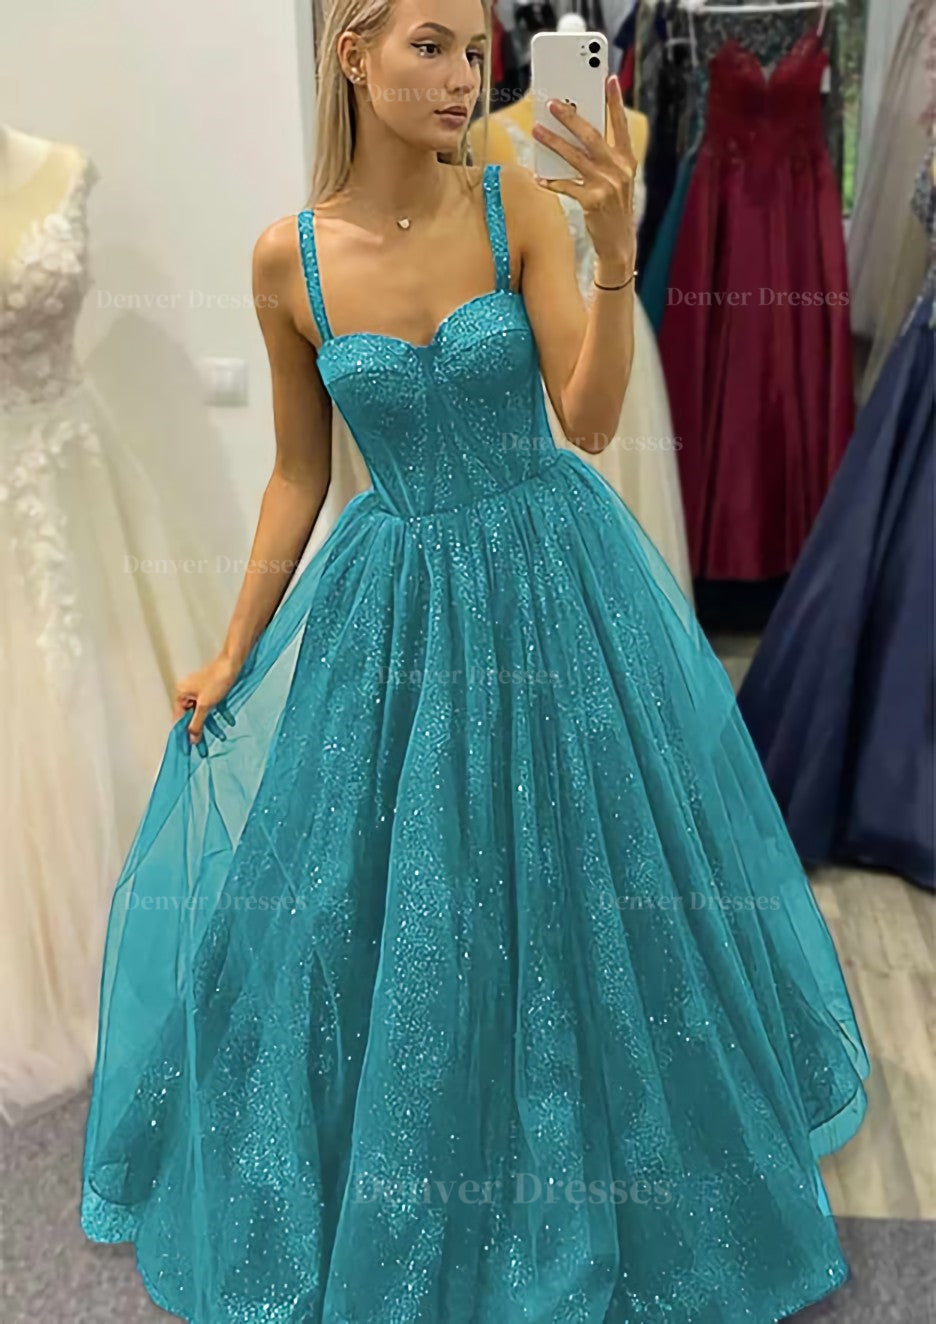 Party Dress Express, A-line Sweetheart Spaghetti Straps Long/Floor-Length Tulle Glitter Prom Dress